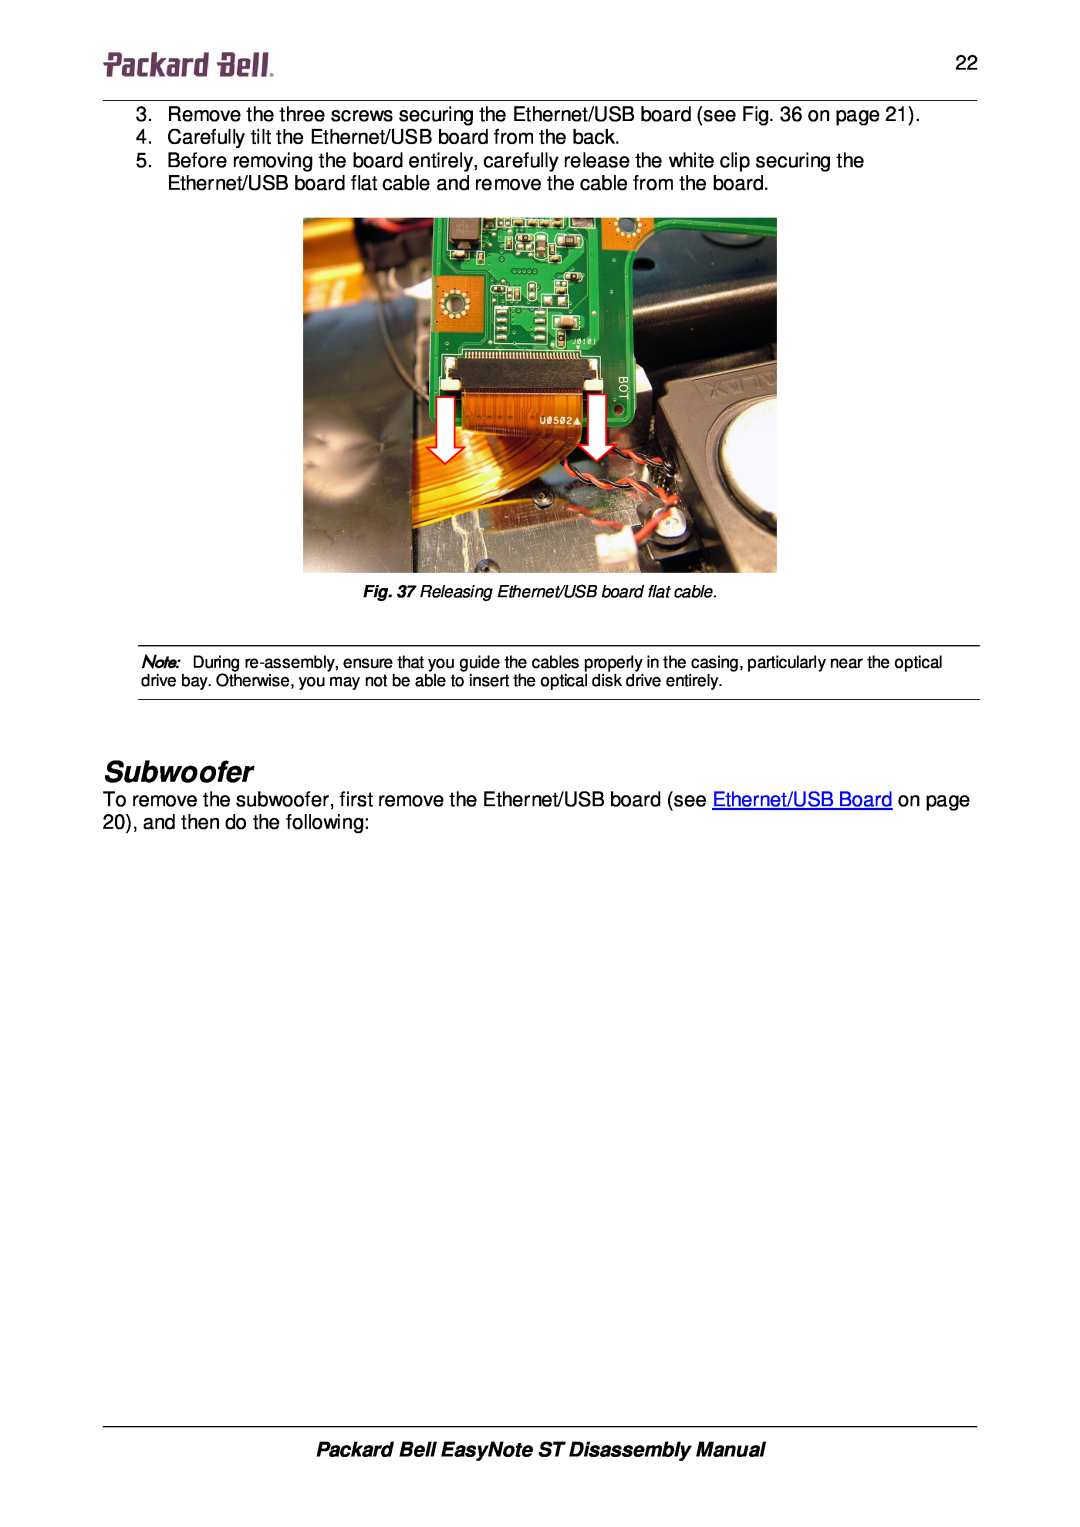 Packard Bell manual Subwoofer, Packard Bell EasyNote ST Disassembly Manual 